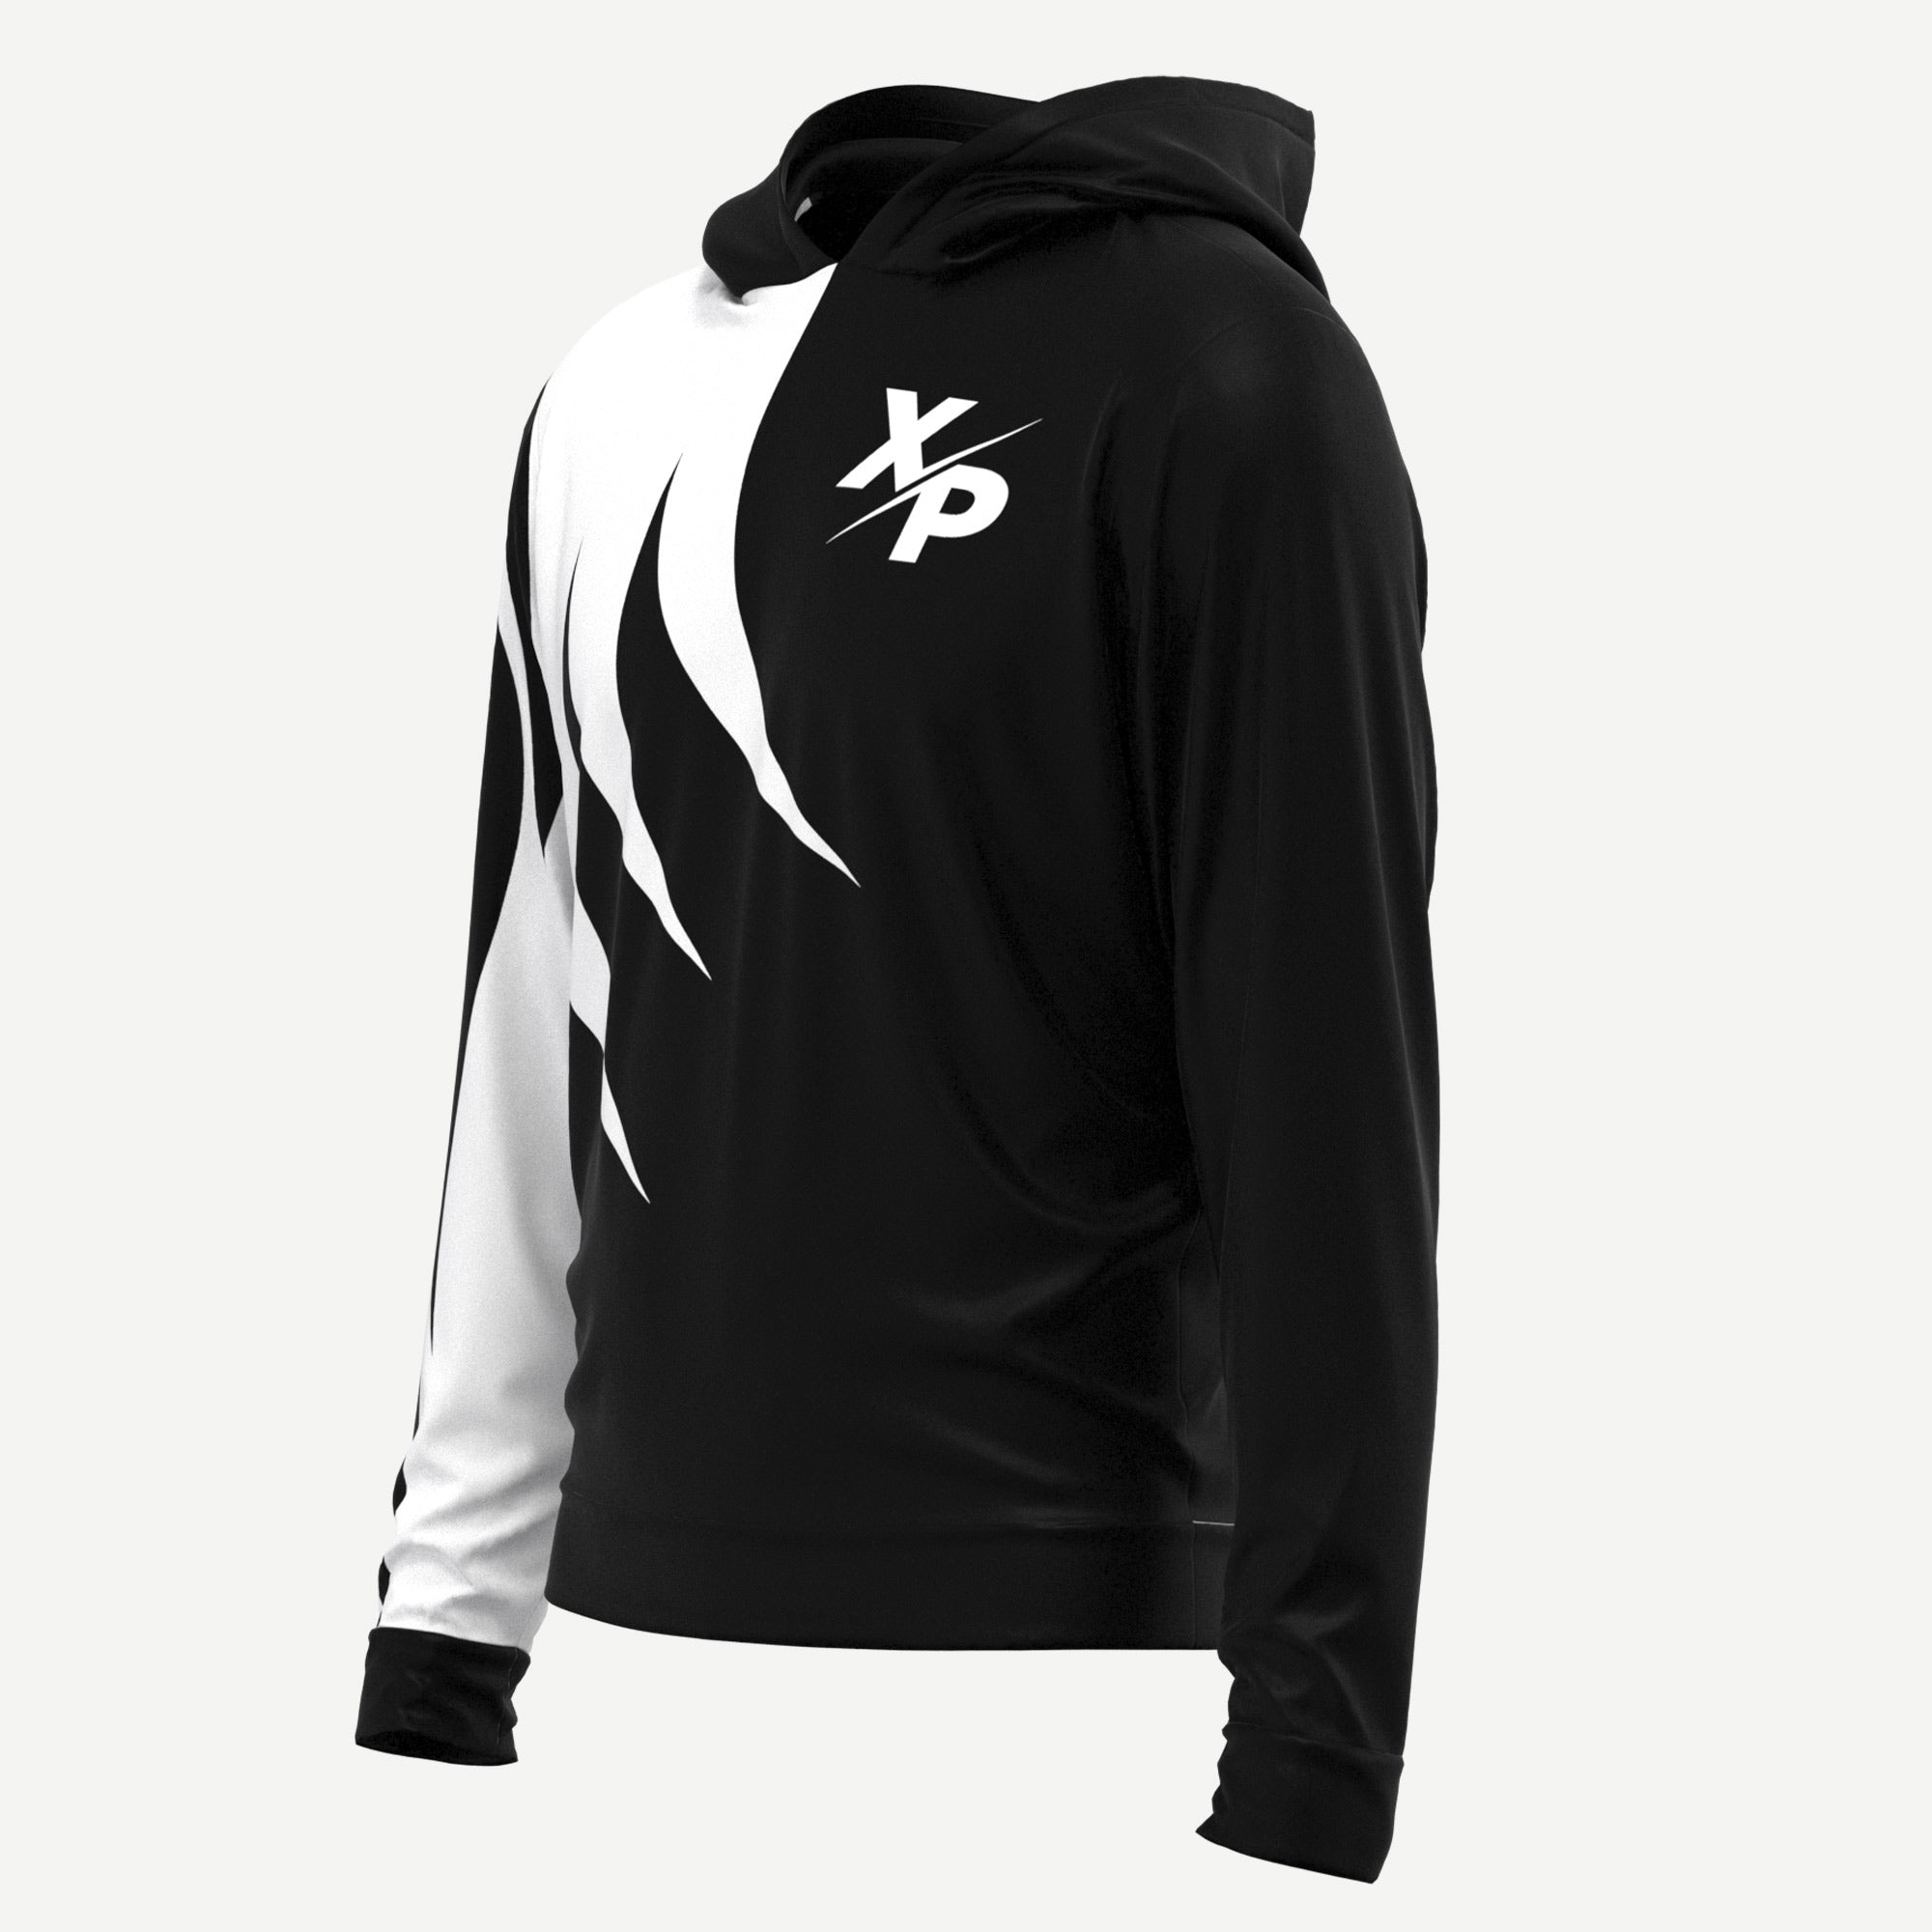 XP Claw Fully Sublimated Hoodie Xtreme Pro Apparel